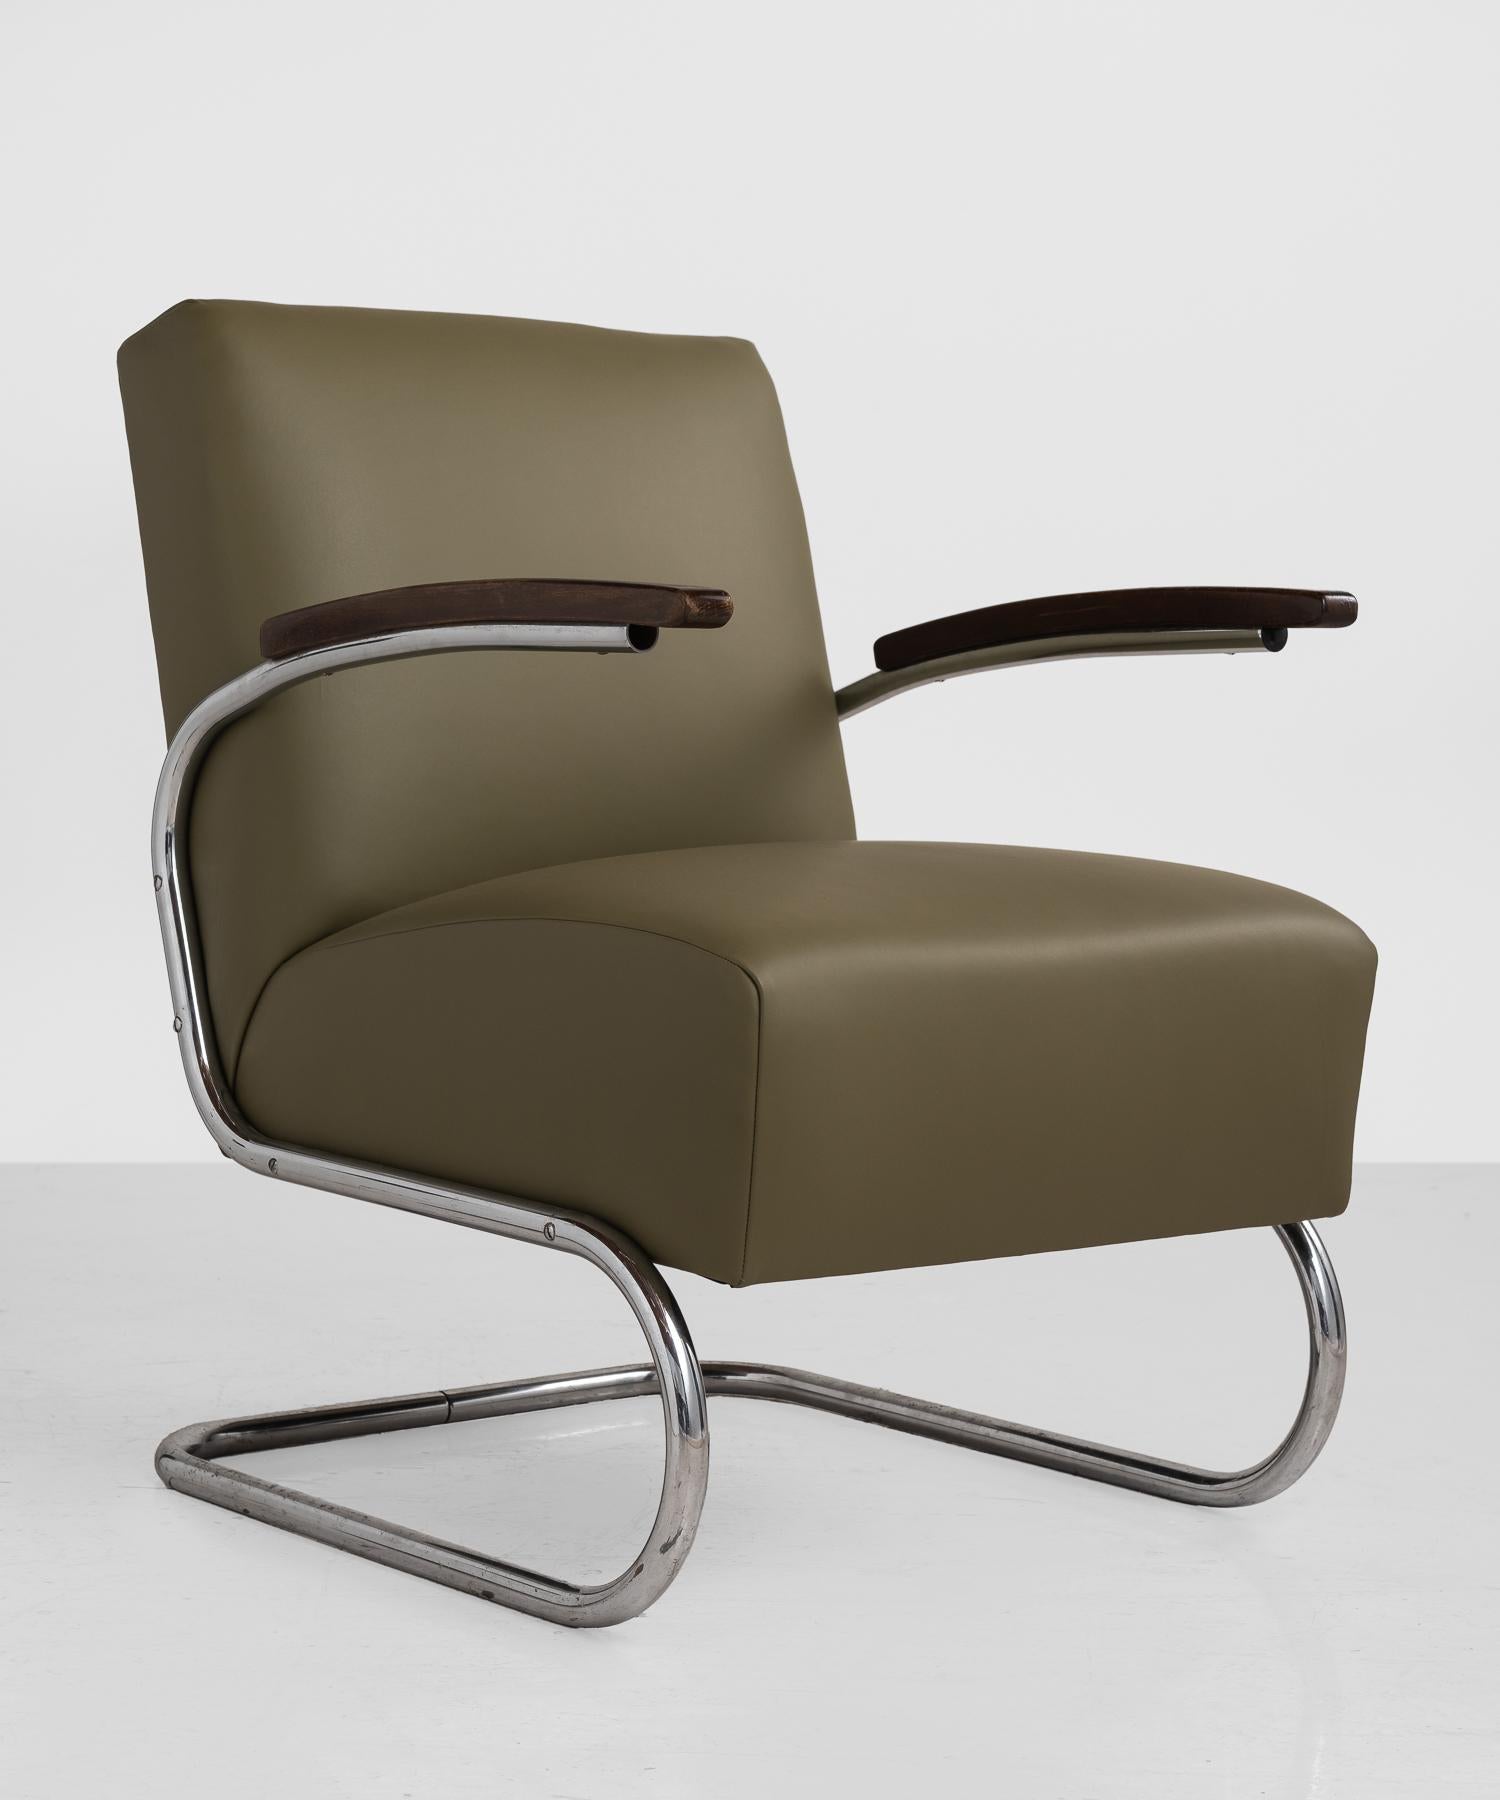 Thonet modern leather armchair, Germany, circa 1930.

Model SS41 Thonet armchair, newly reupholstered in Bushel leather by Maharam. Cantilever frame in chromed steel with wooden armrests.

Measures: 27.5